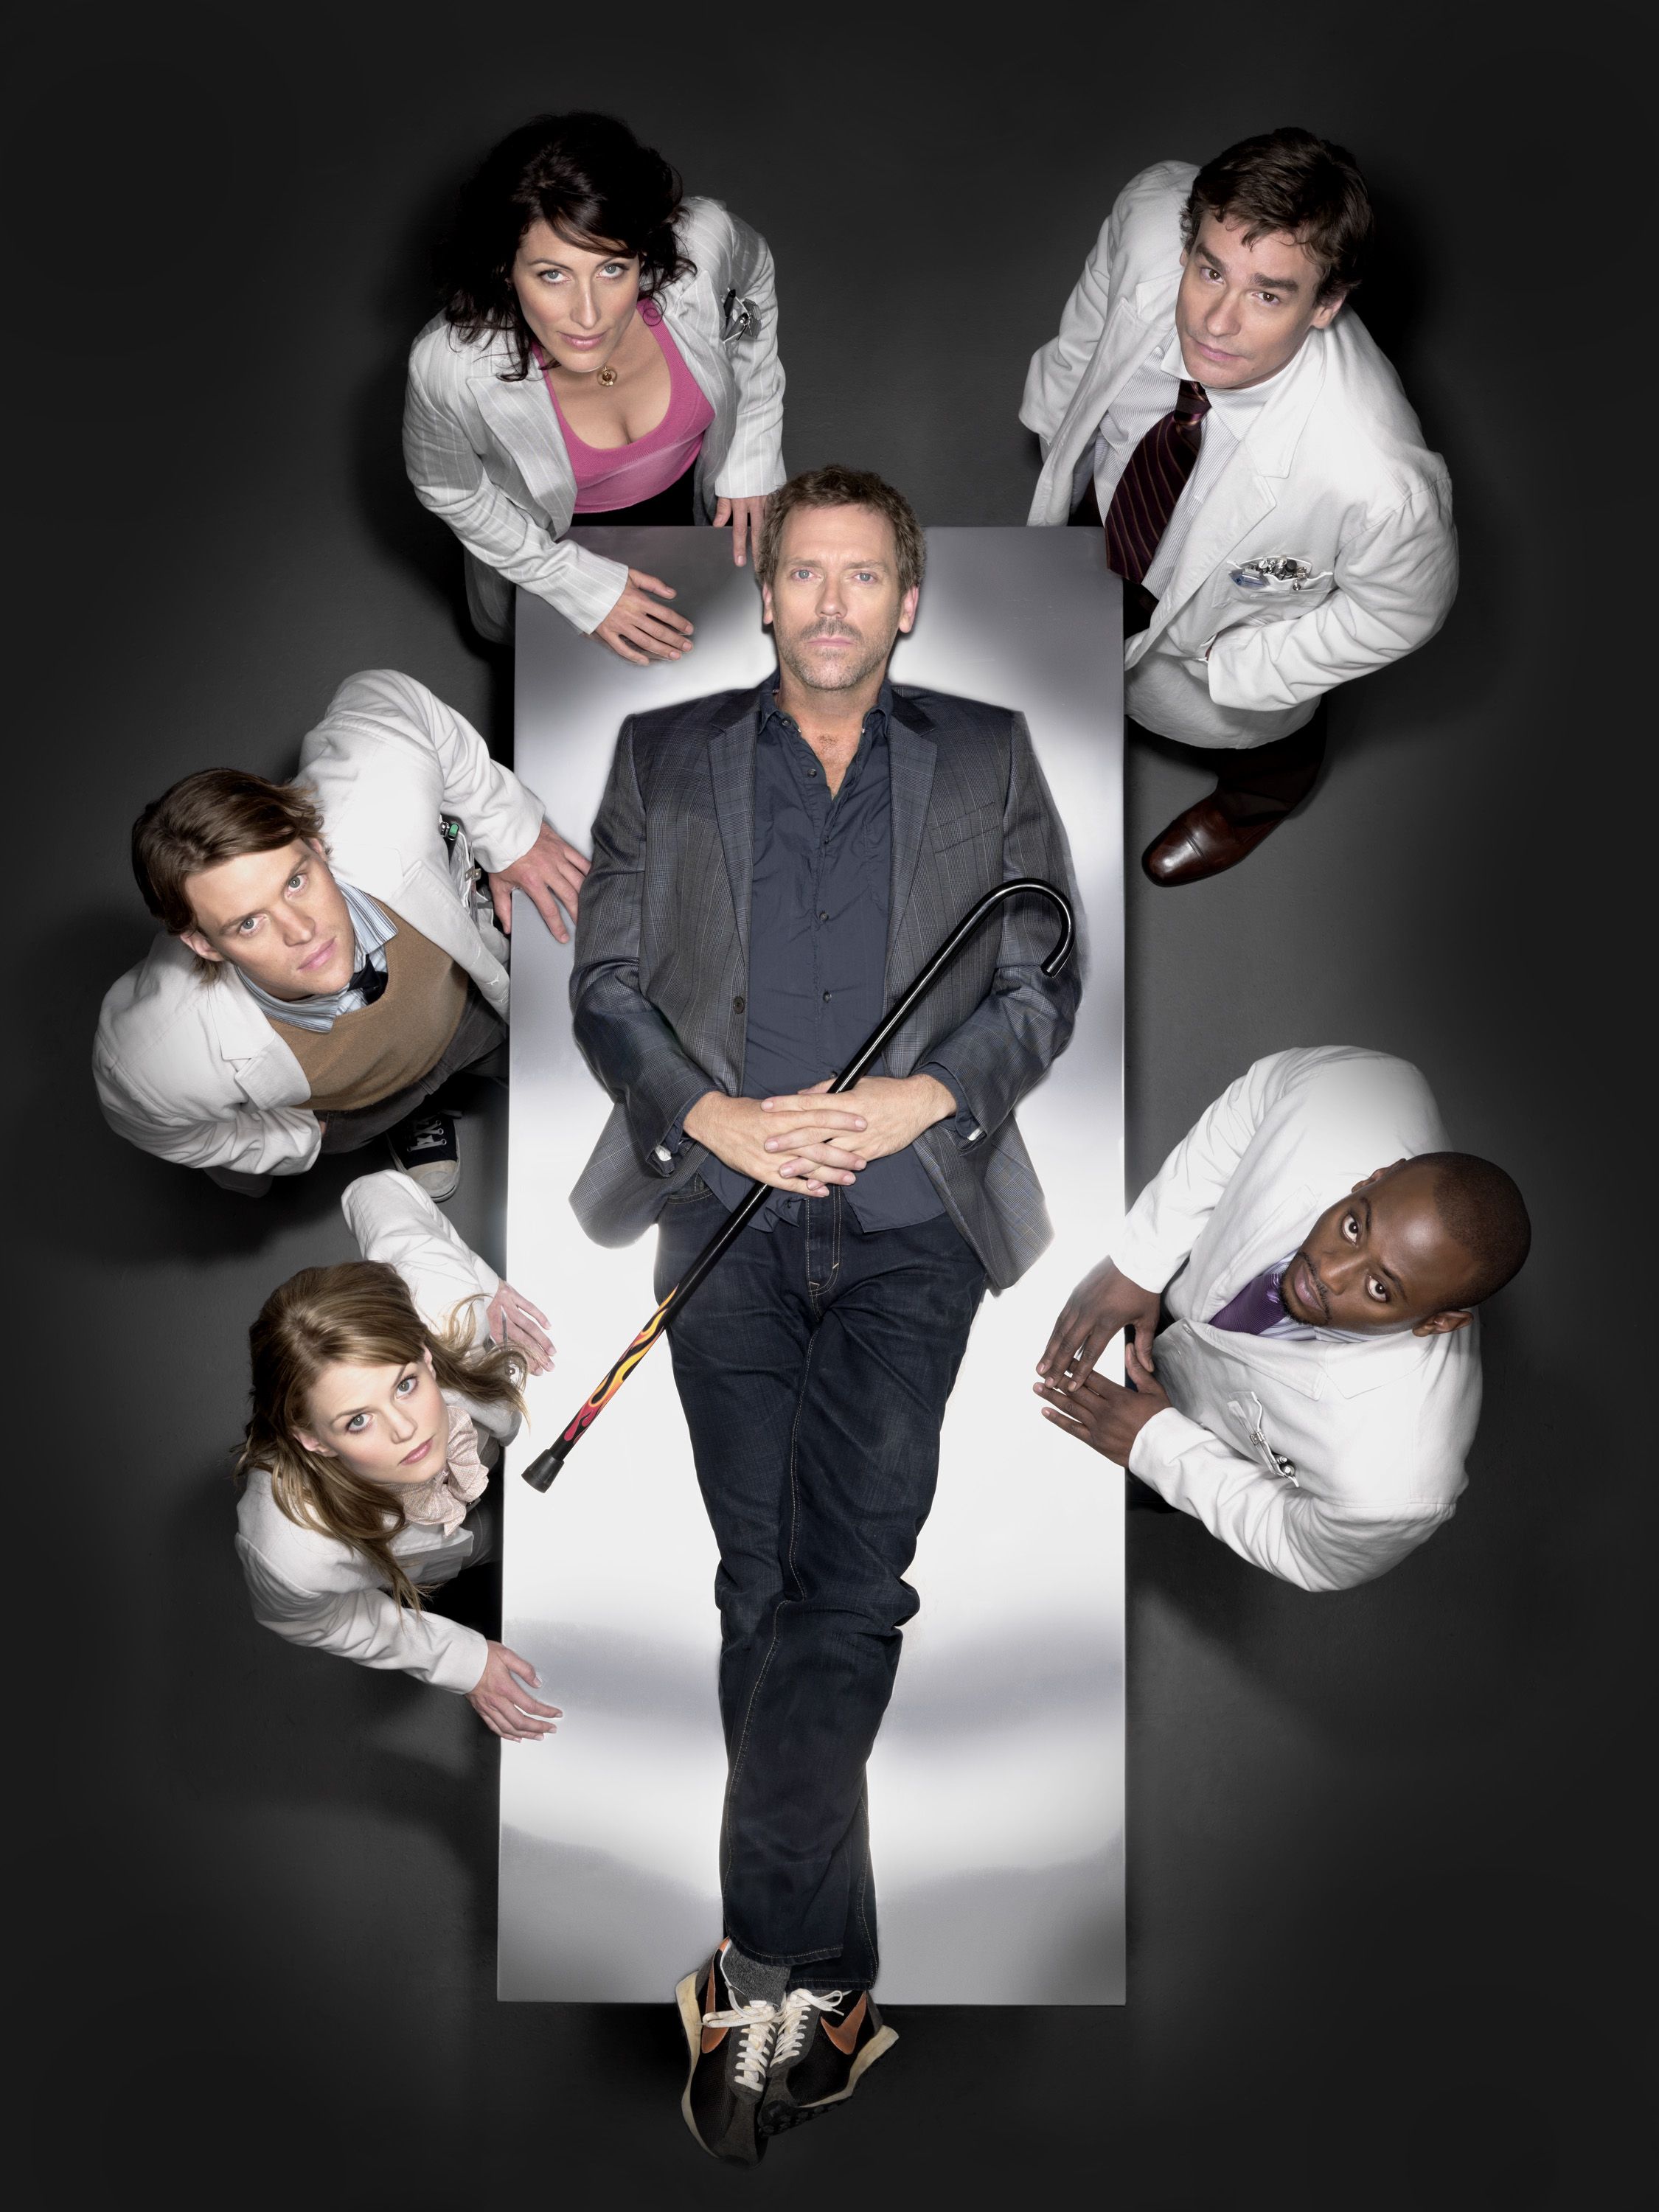 25 Things You Didn't Know About House - House TV Show Hugh Laurie Facts